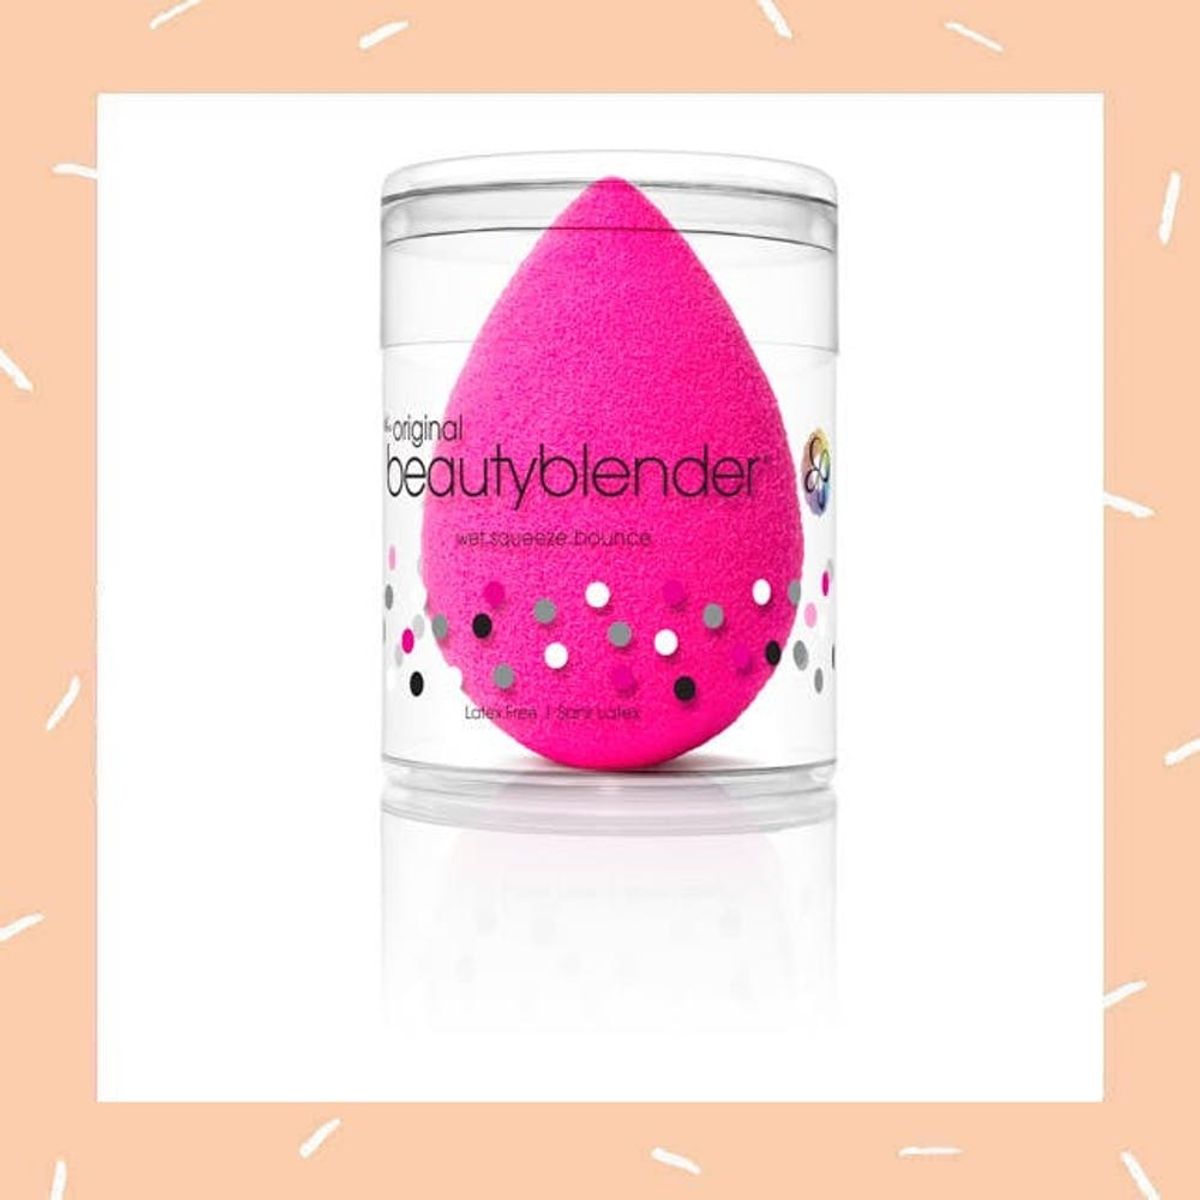 You’ll Soon Be Able to Stock Up on Beautyblenders at *This* Iconic Makeup Brand’s Stores